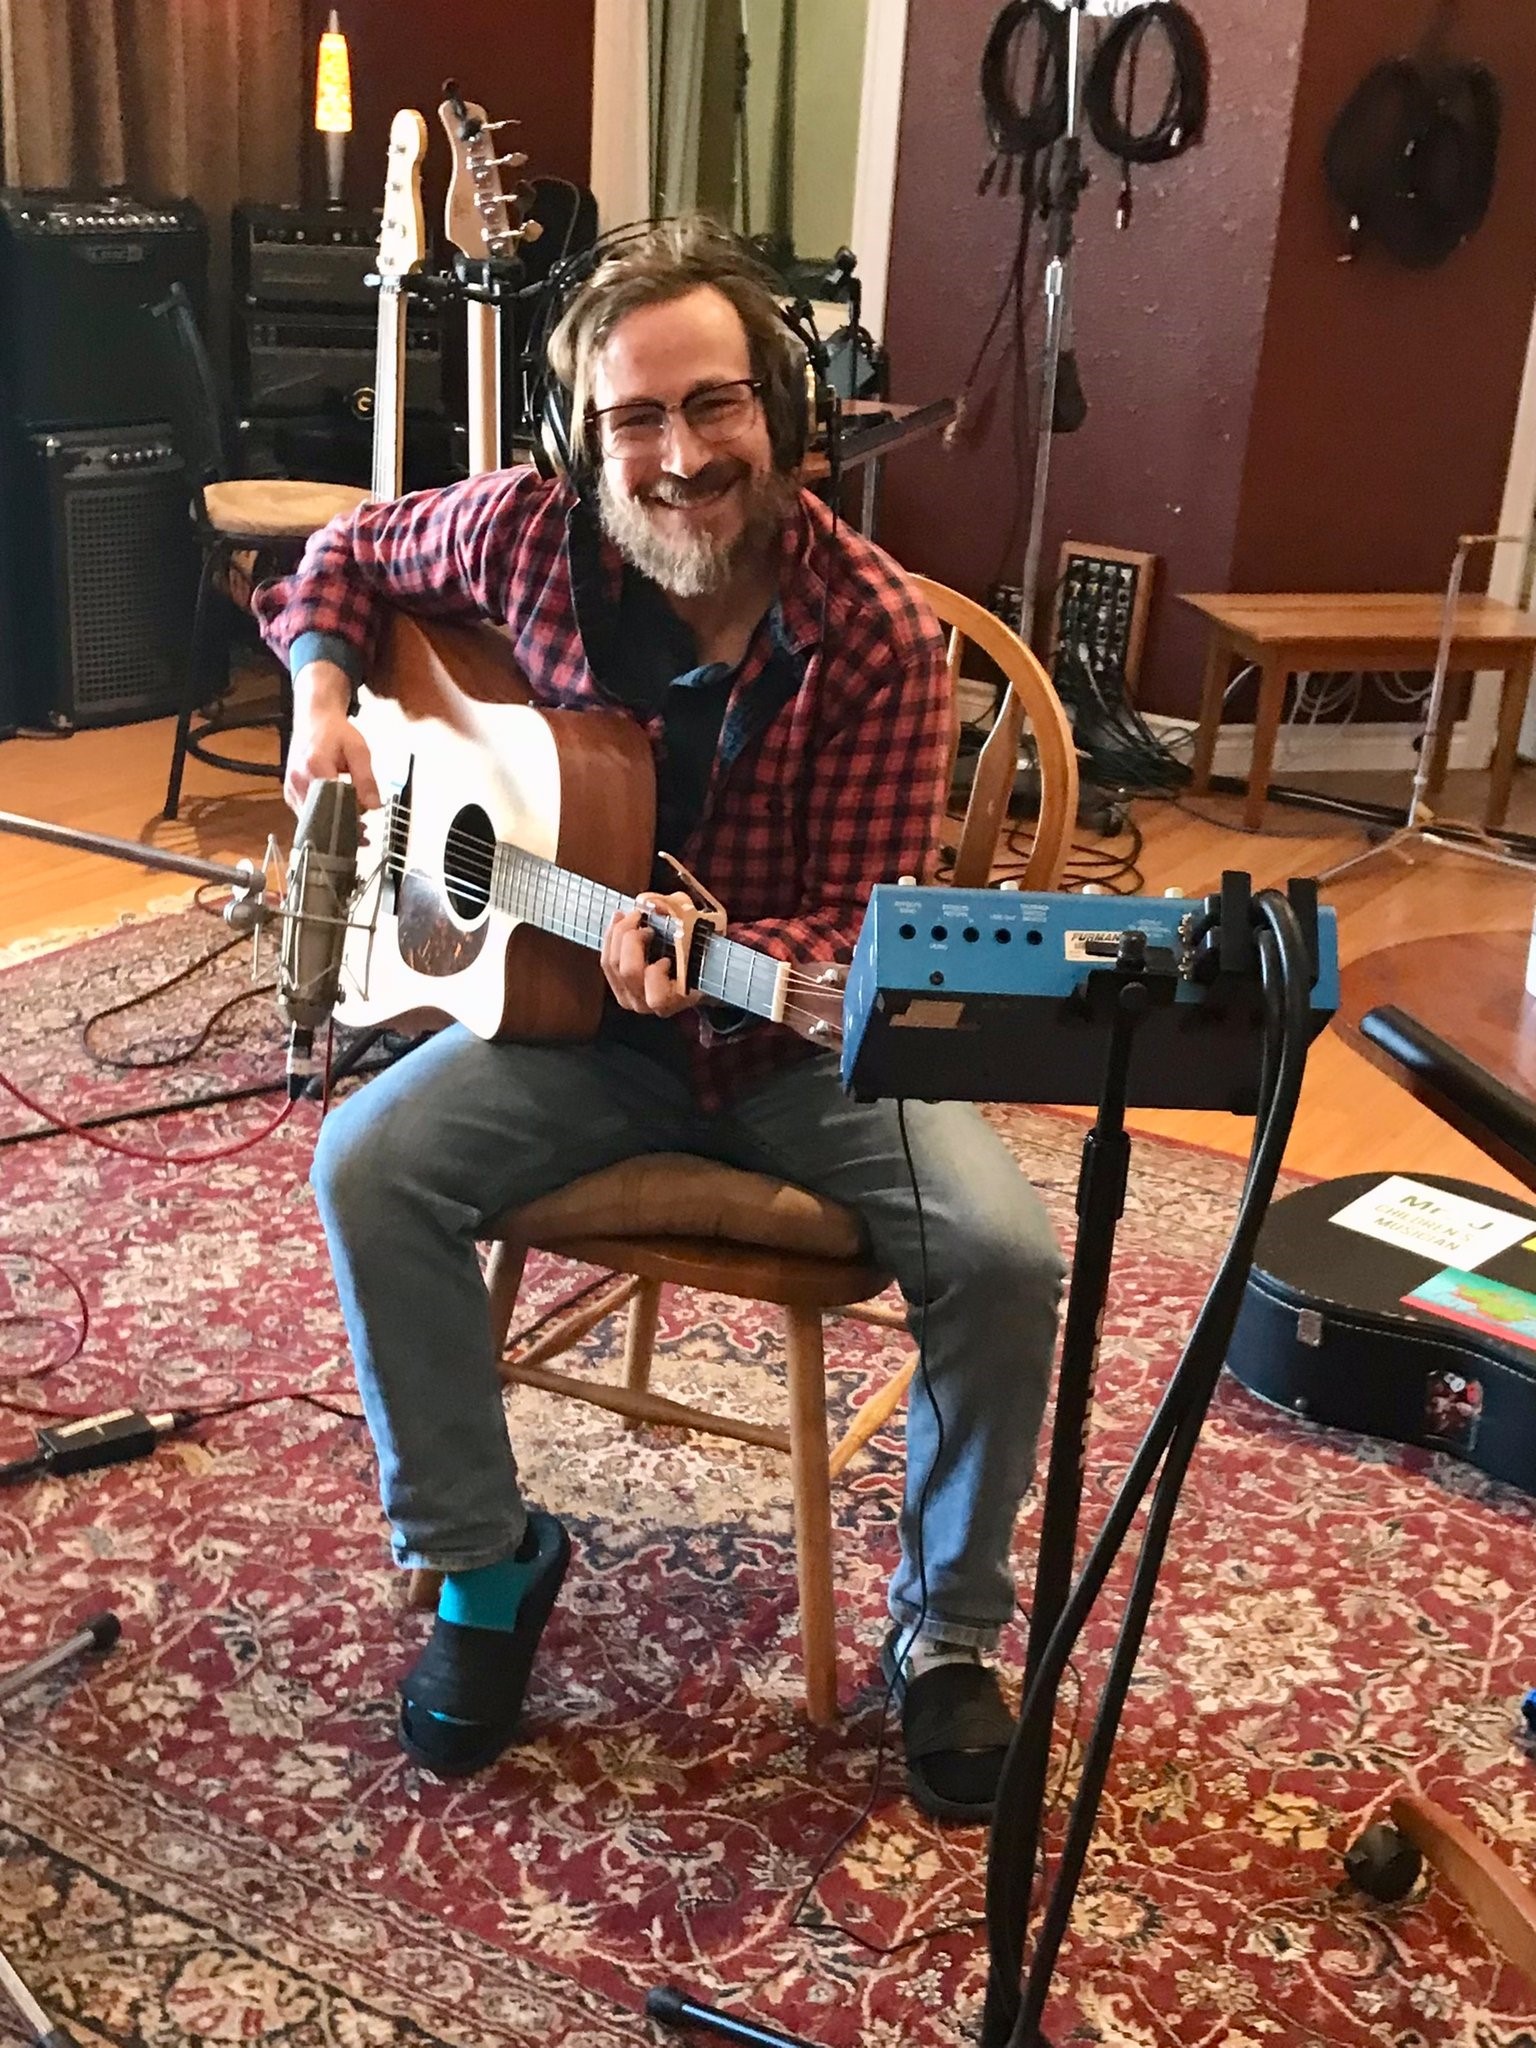 This photo features musician Geoff Jackson sitting in the middle of a recording room holding an acoustic guitar. 